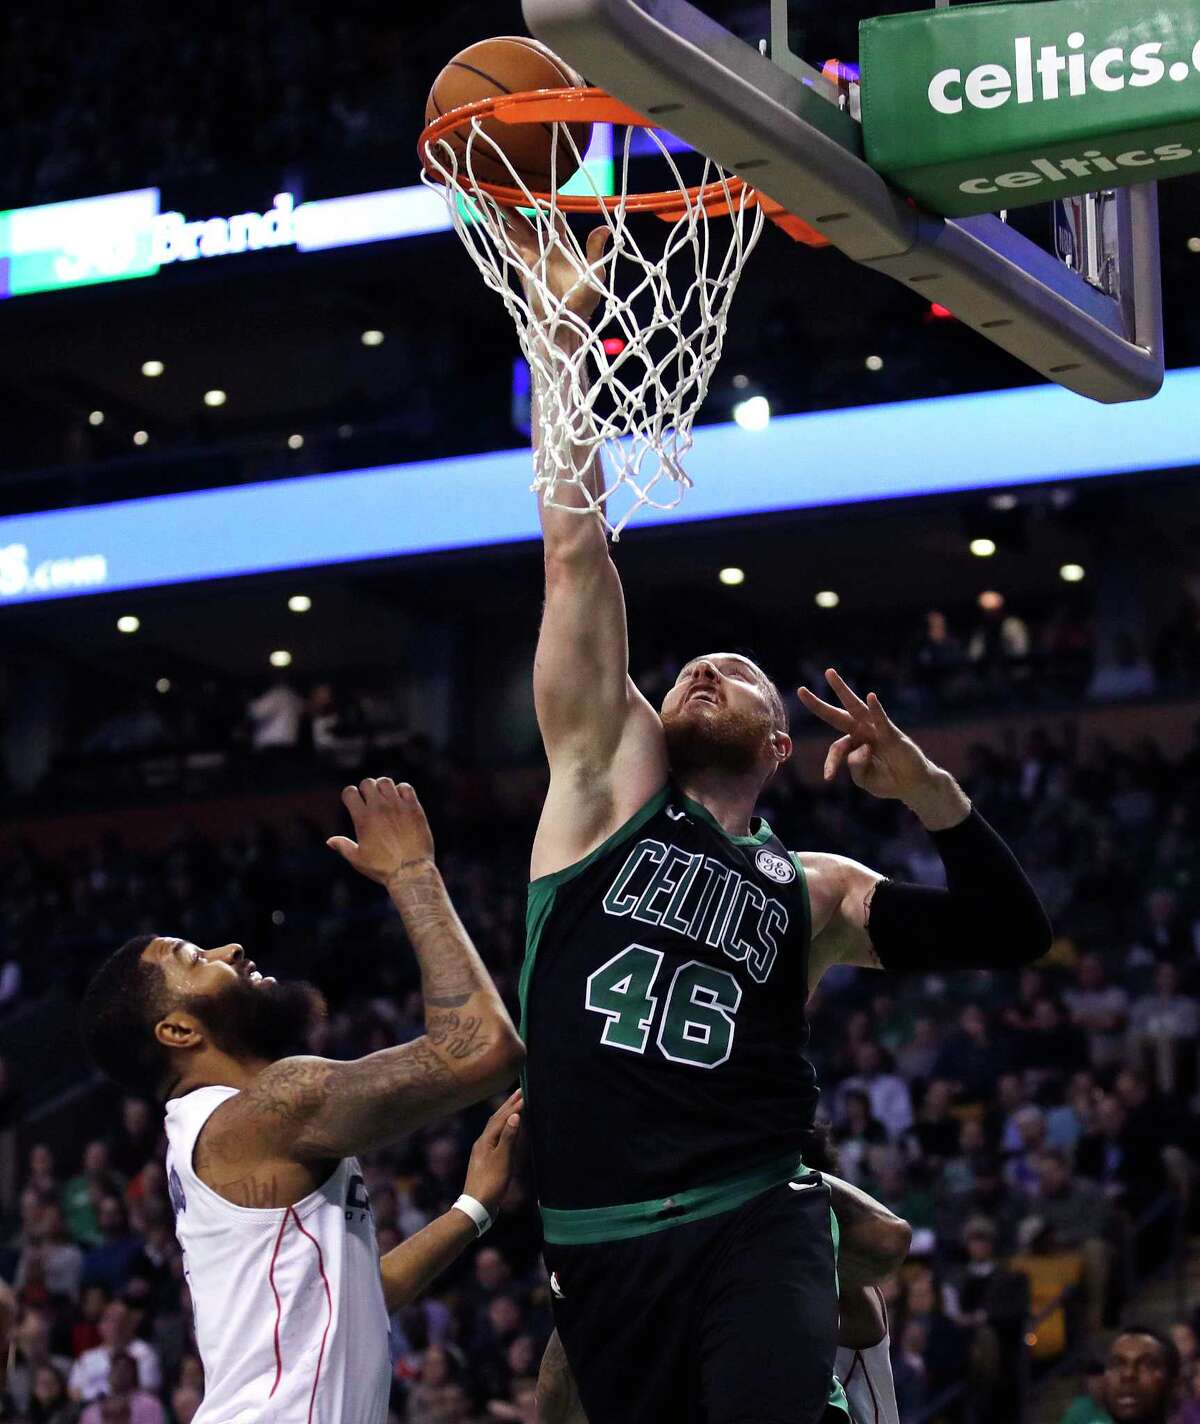 Boston Celtics center Aron Baynes (46) tips in a rebound over Washington Wizards forward Markieff Morris during the first quarter of an NBA basketball game in Boston, Wednesday, March 14, 2018. (AP Photo/Charles Krupa)